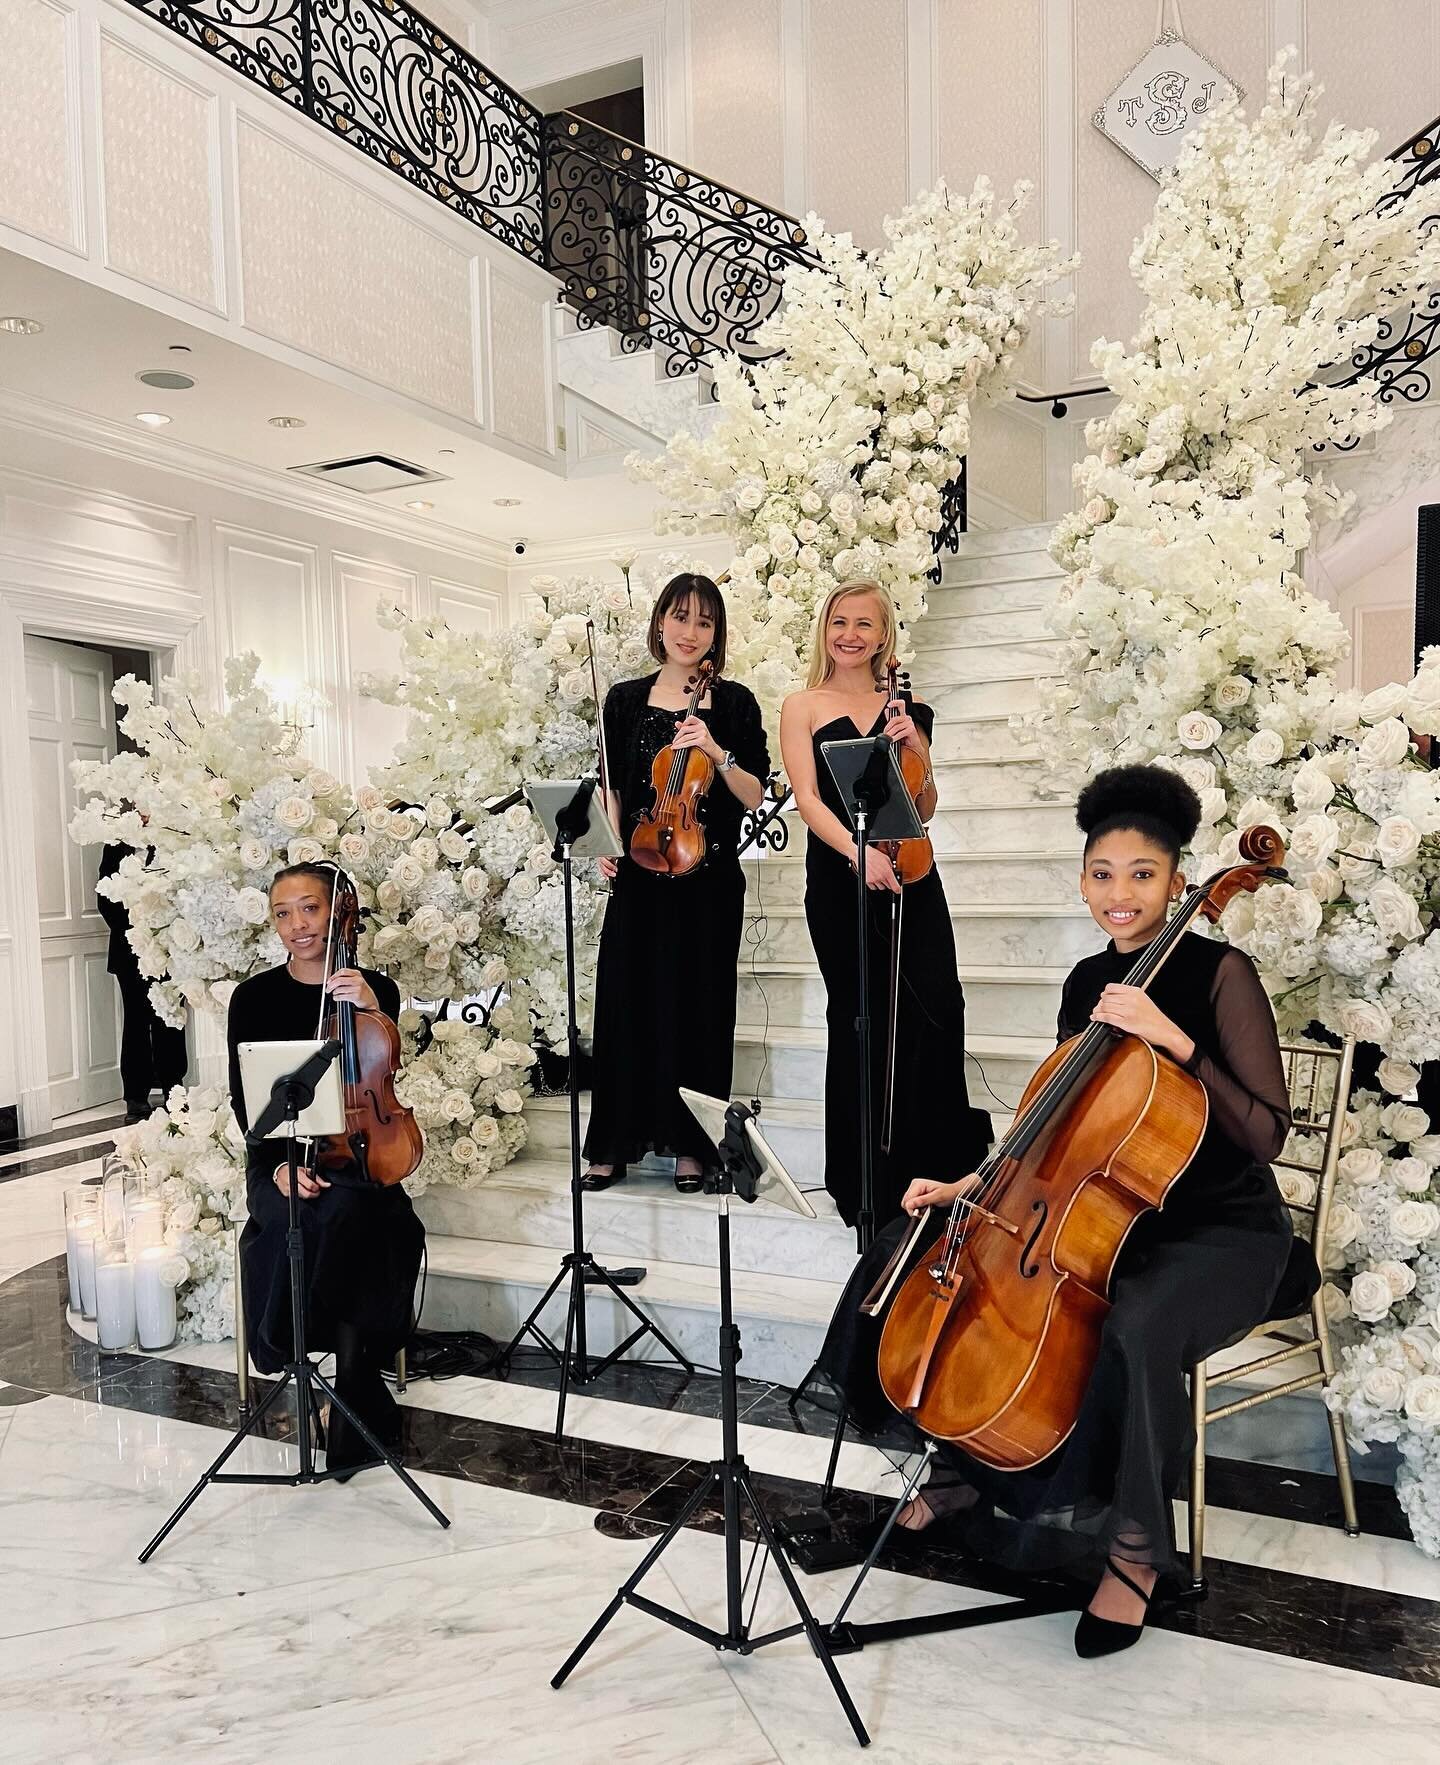 A dramatic string quartet guest greeting? Yes! We love it too! Thank you to @stellar_strings_nyc for helping our clients realize their vision. #njweddings